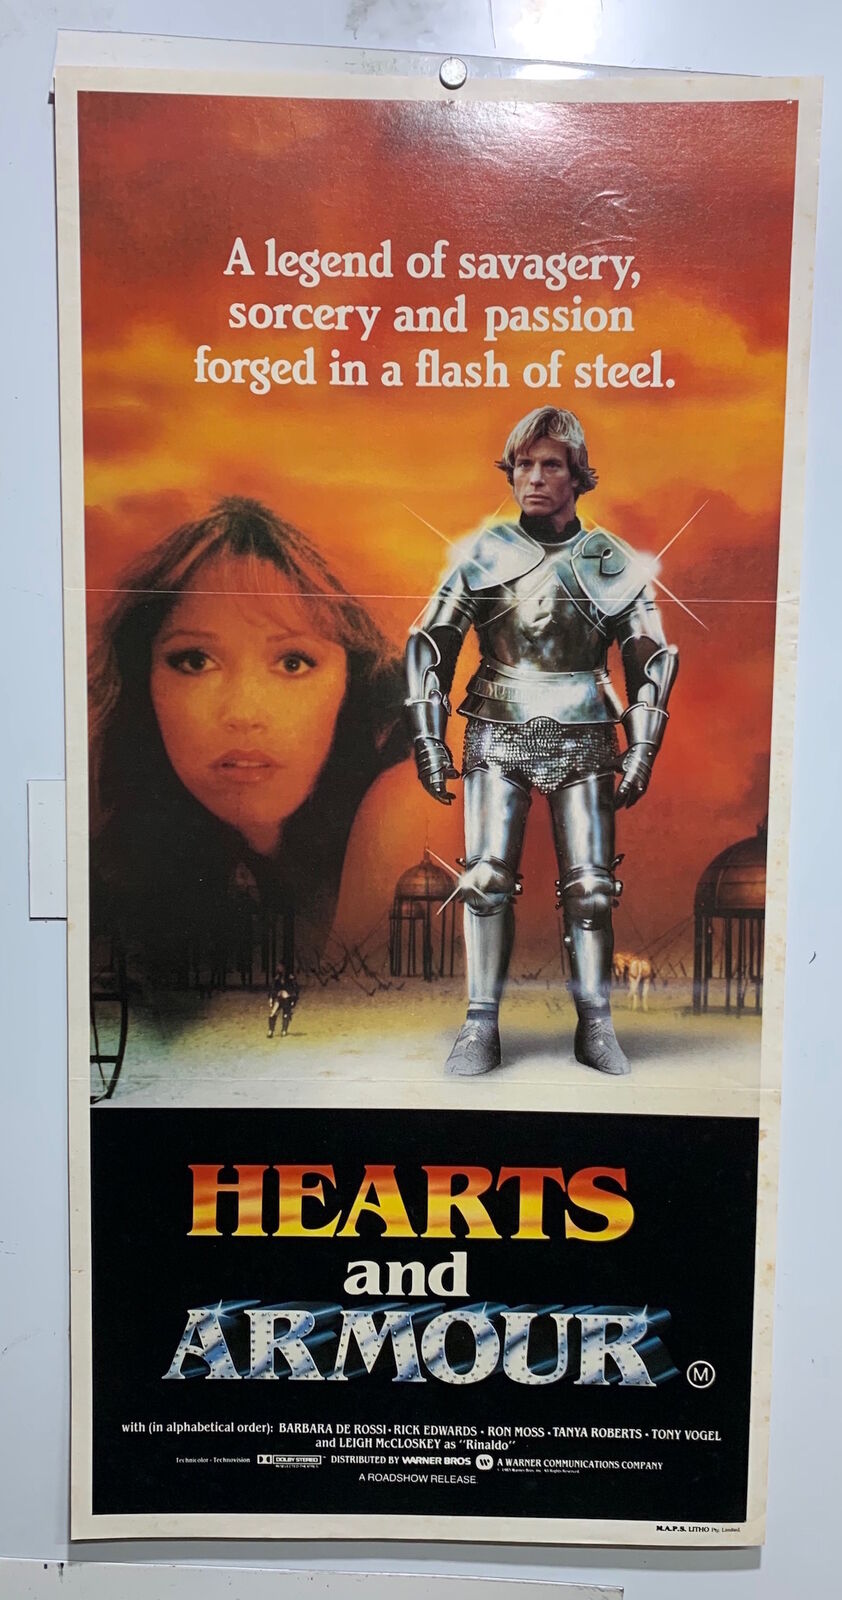 ORIGINAL DAYBILL MOVIE POSTER - HEARTS AND ARMOUR